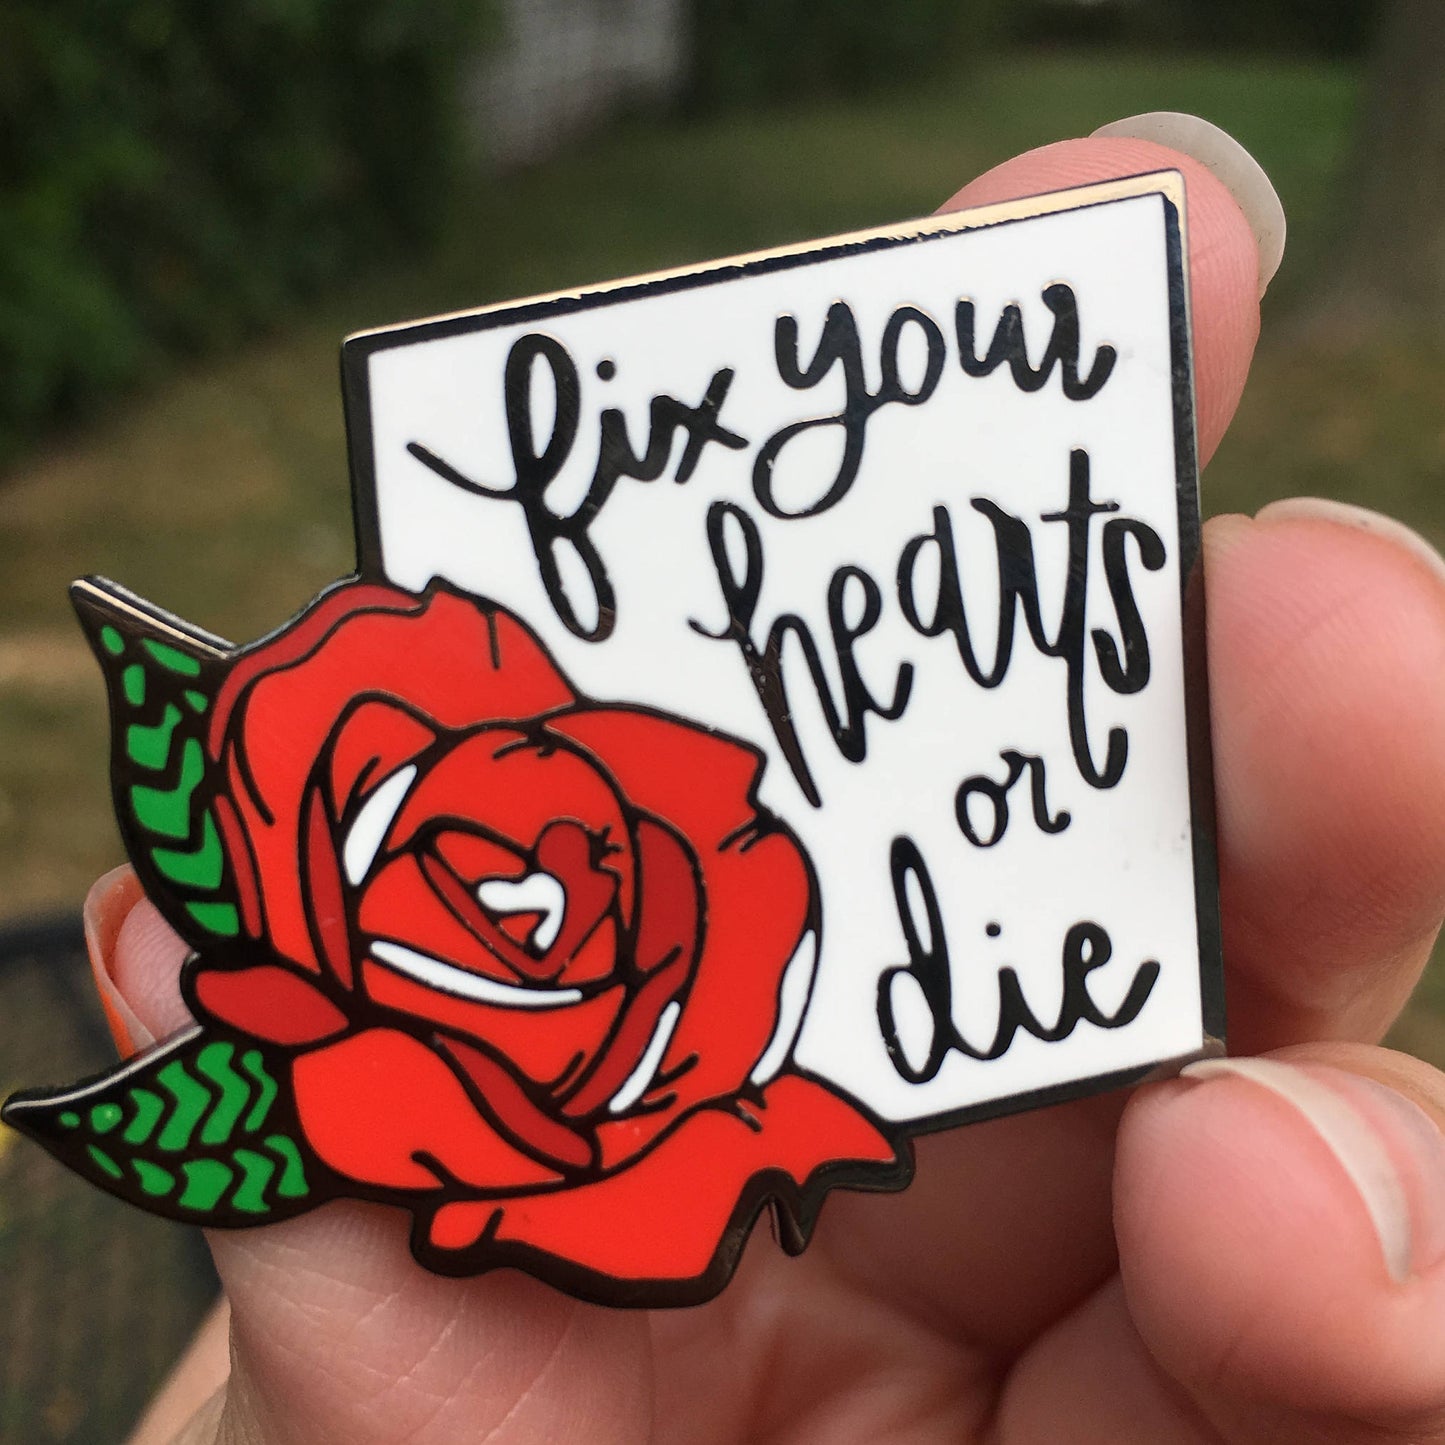 Fix Your Hearts - RED ROSE Charity Pin for Trans Equality